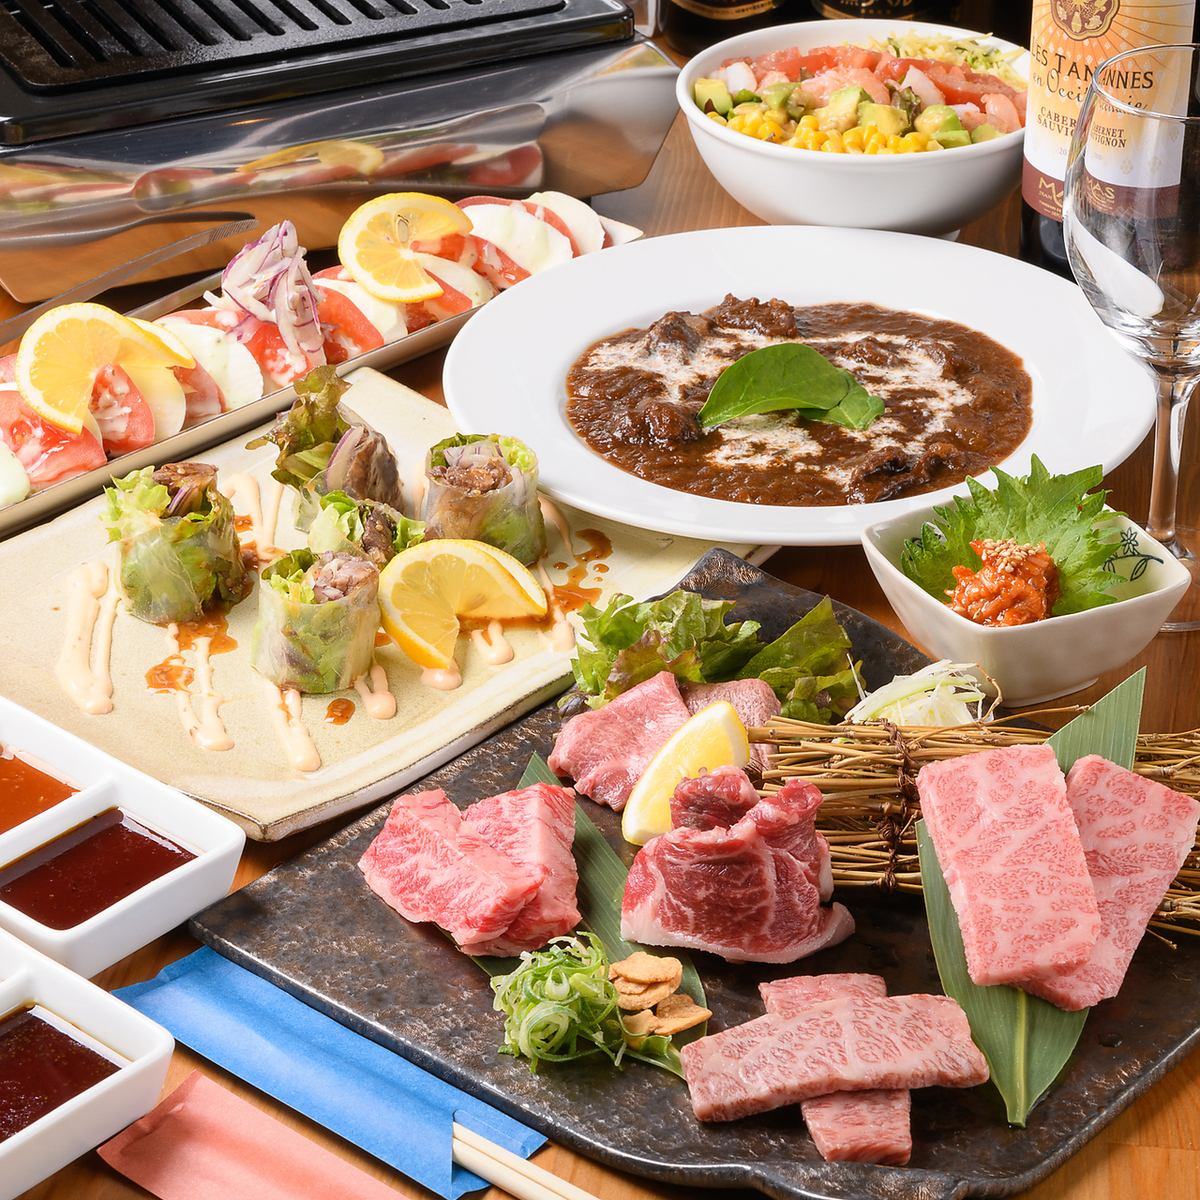 Treat yourself to a slightly more luxurious treat than usual with high-quality yakiniku!